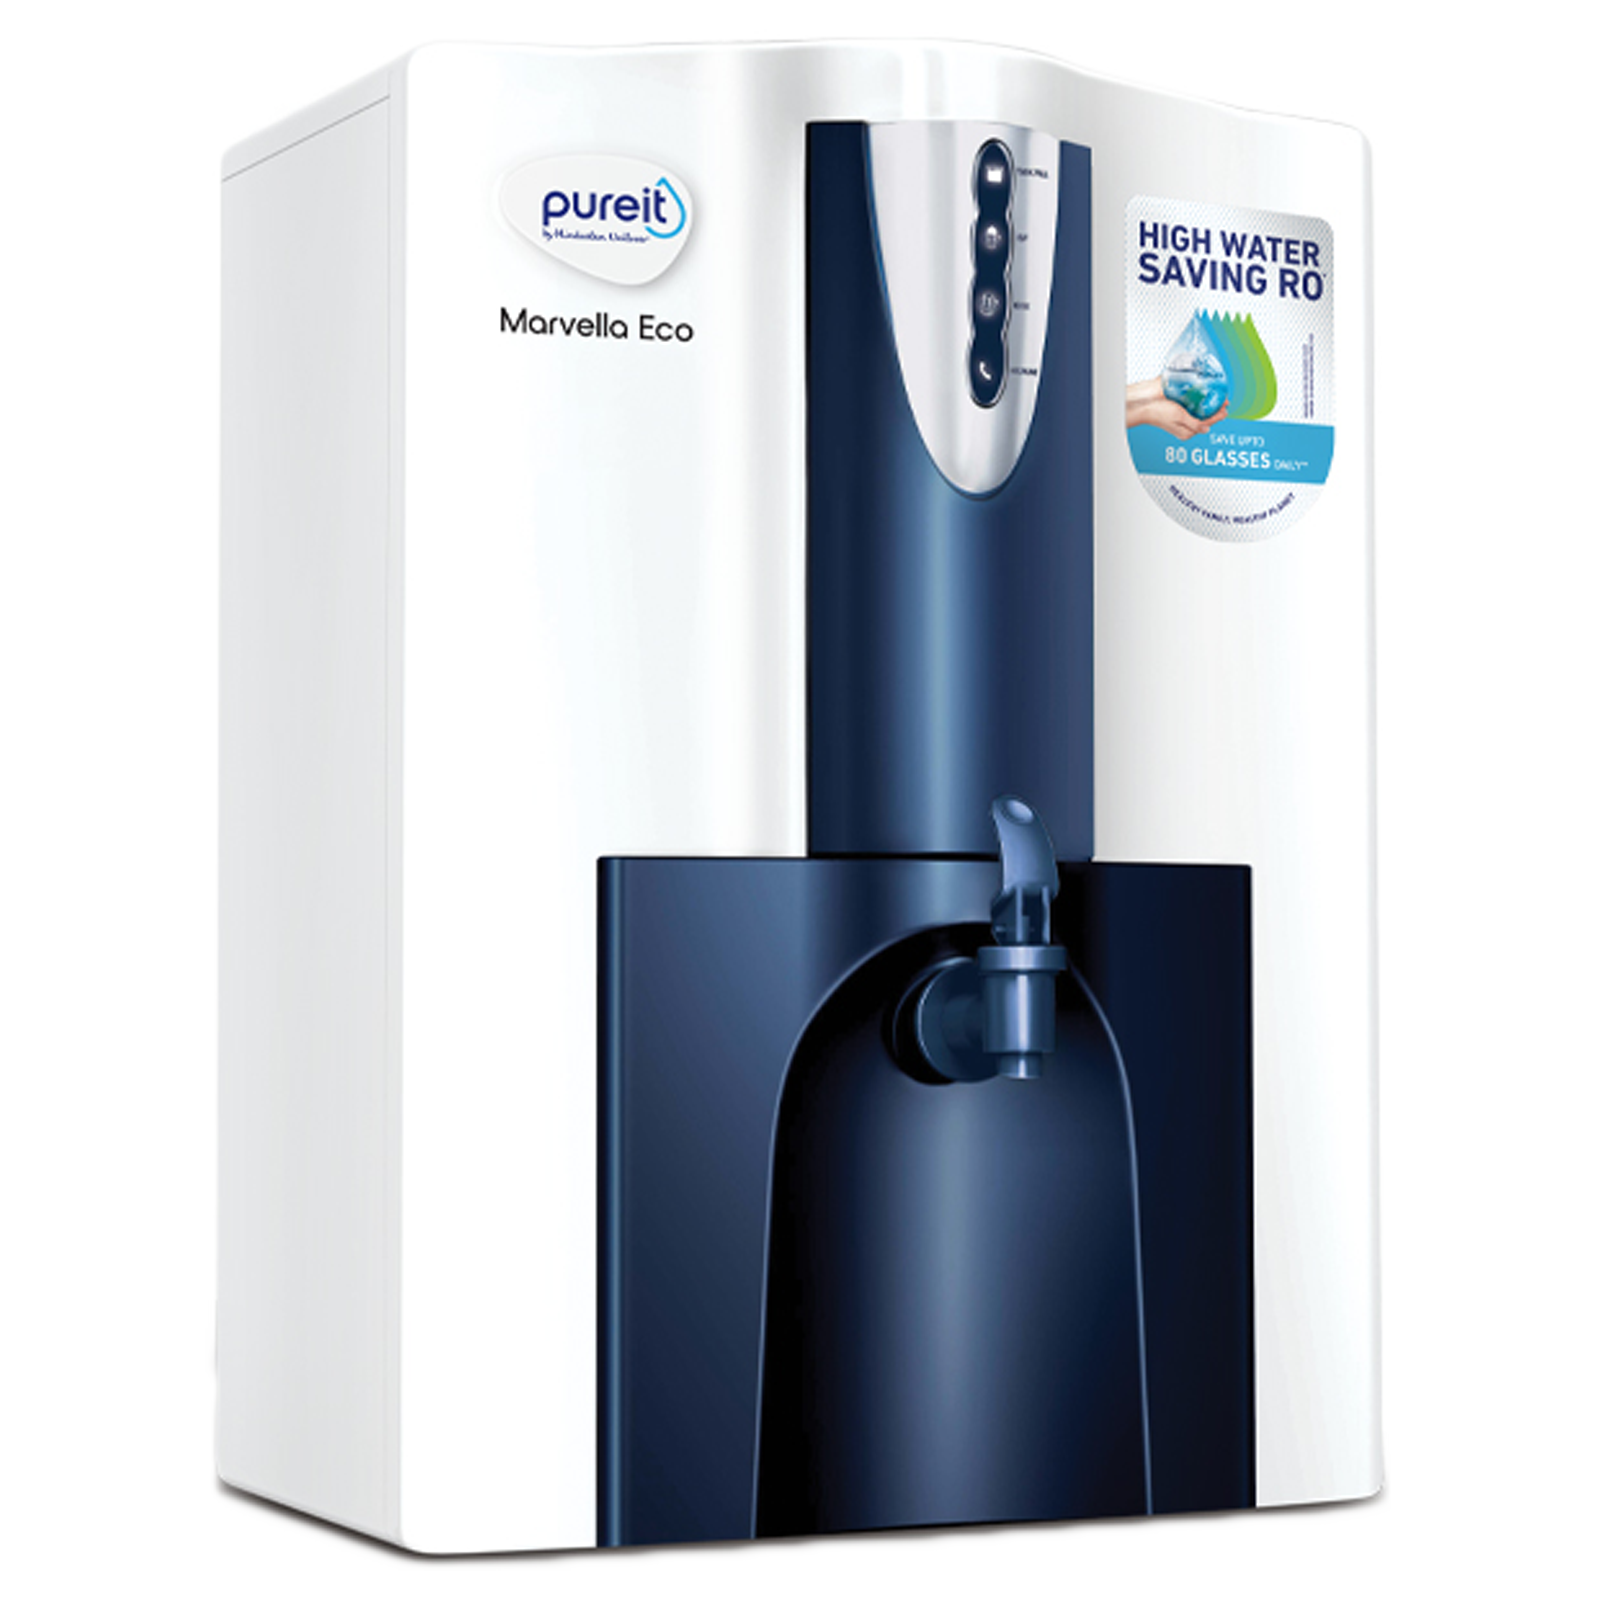 Pureit Marvella Eco RO+UV Electrical Water Purifier (7 Stage Purification, WPNT500, White and Blue)_1